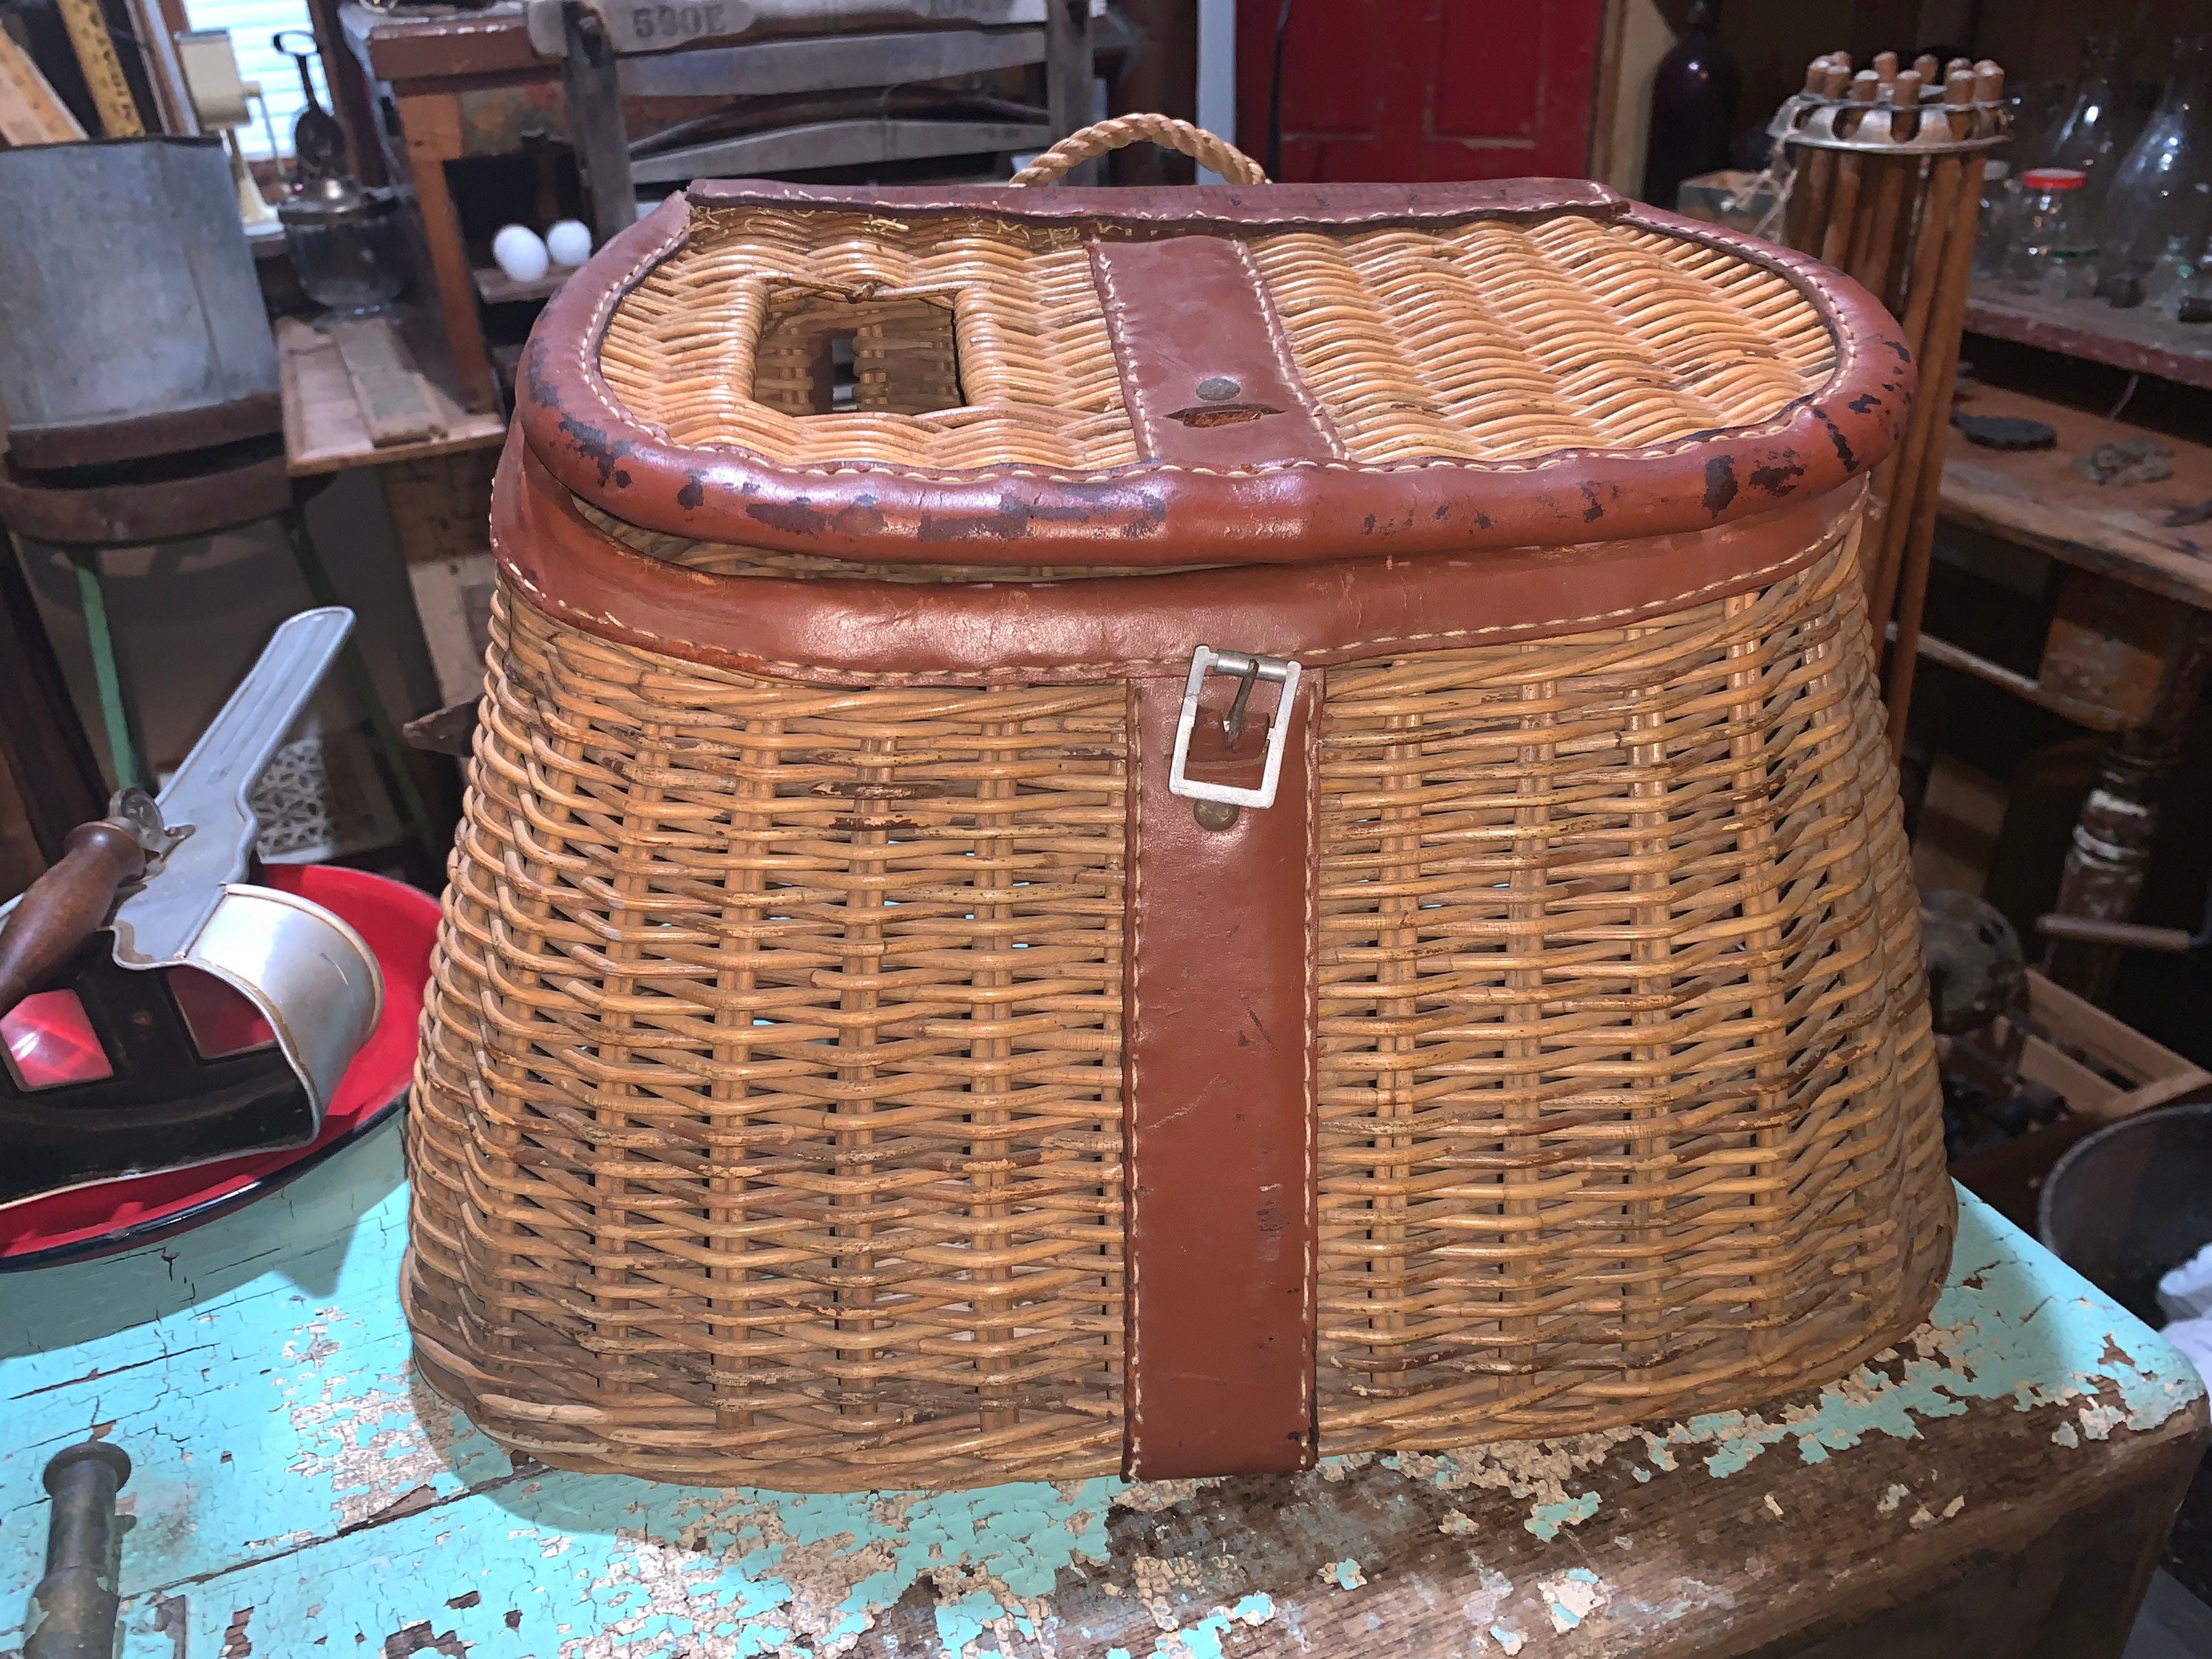 Kreel Fishing Basket, Great for Decoration or Actual Use, Measures Approx  14” wide, 8 deep, 9 high, Kreel Basket Only